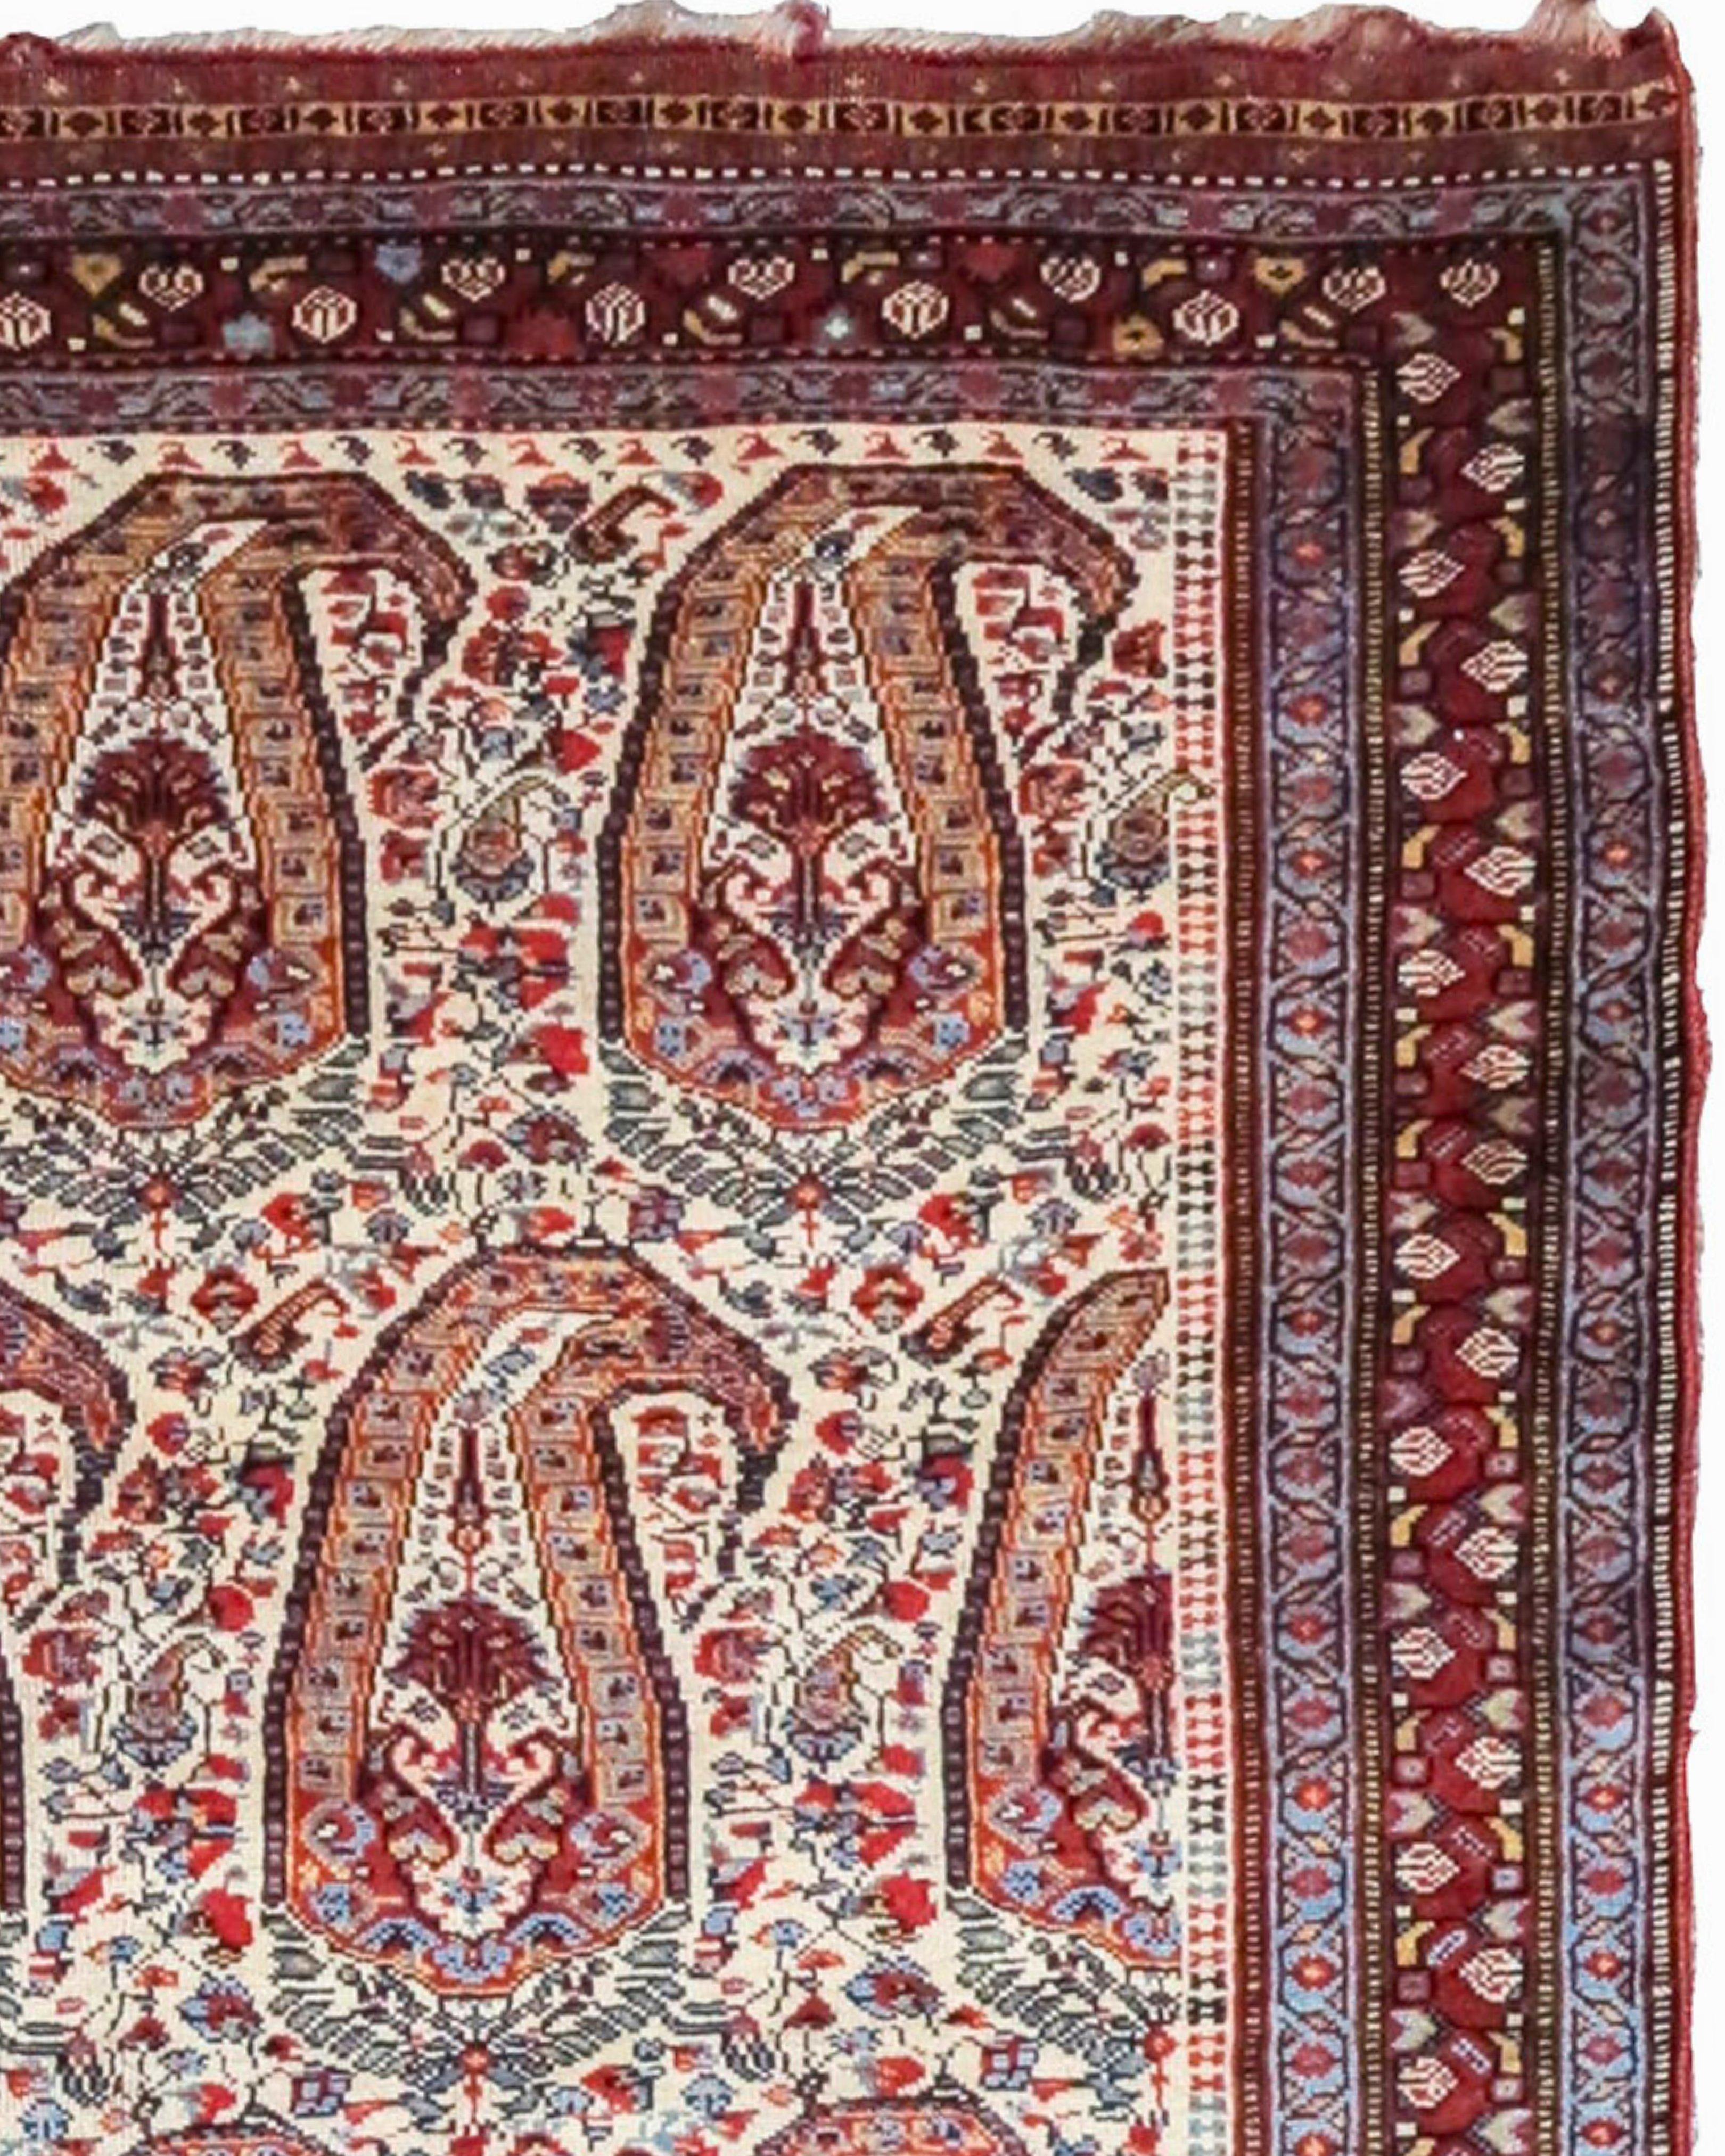 Antique Persian Mashad Rug, 19th Century

Mashad is situated in the far northeast of Persia and is the largest city of the ancient province of Khorosan. Like other eastern Persian carpet weaving groups, Mashad carpets of the 19th and early 20th